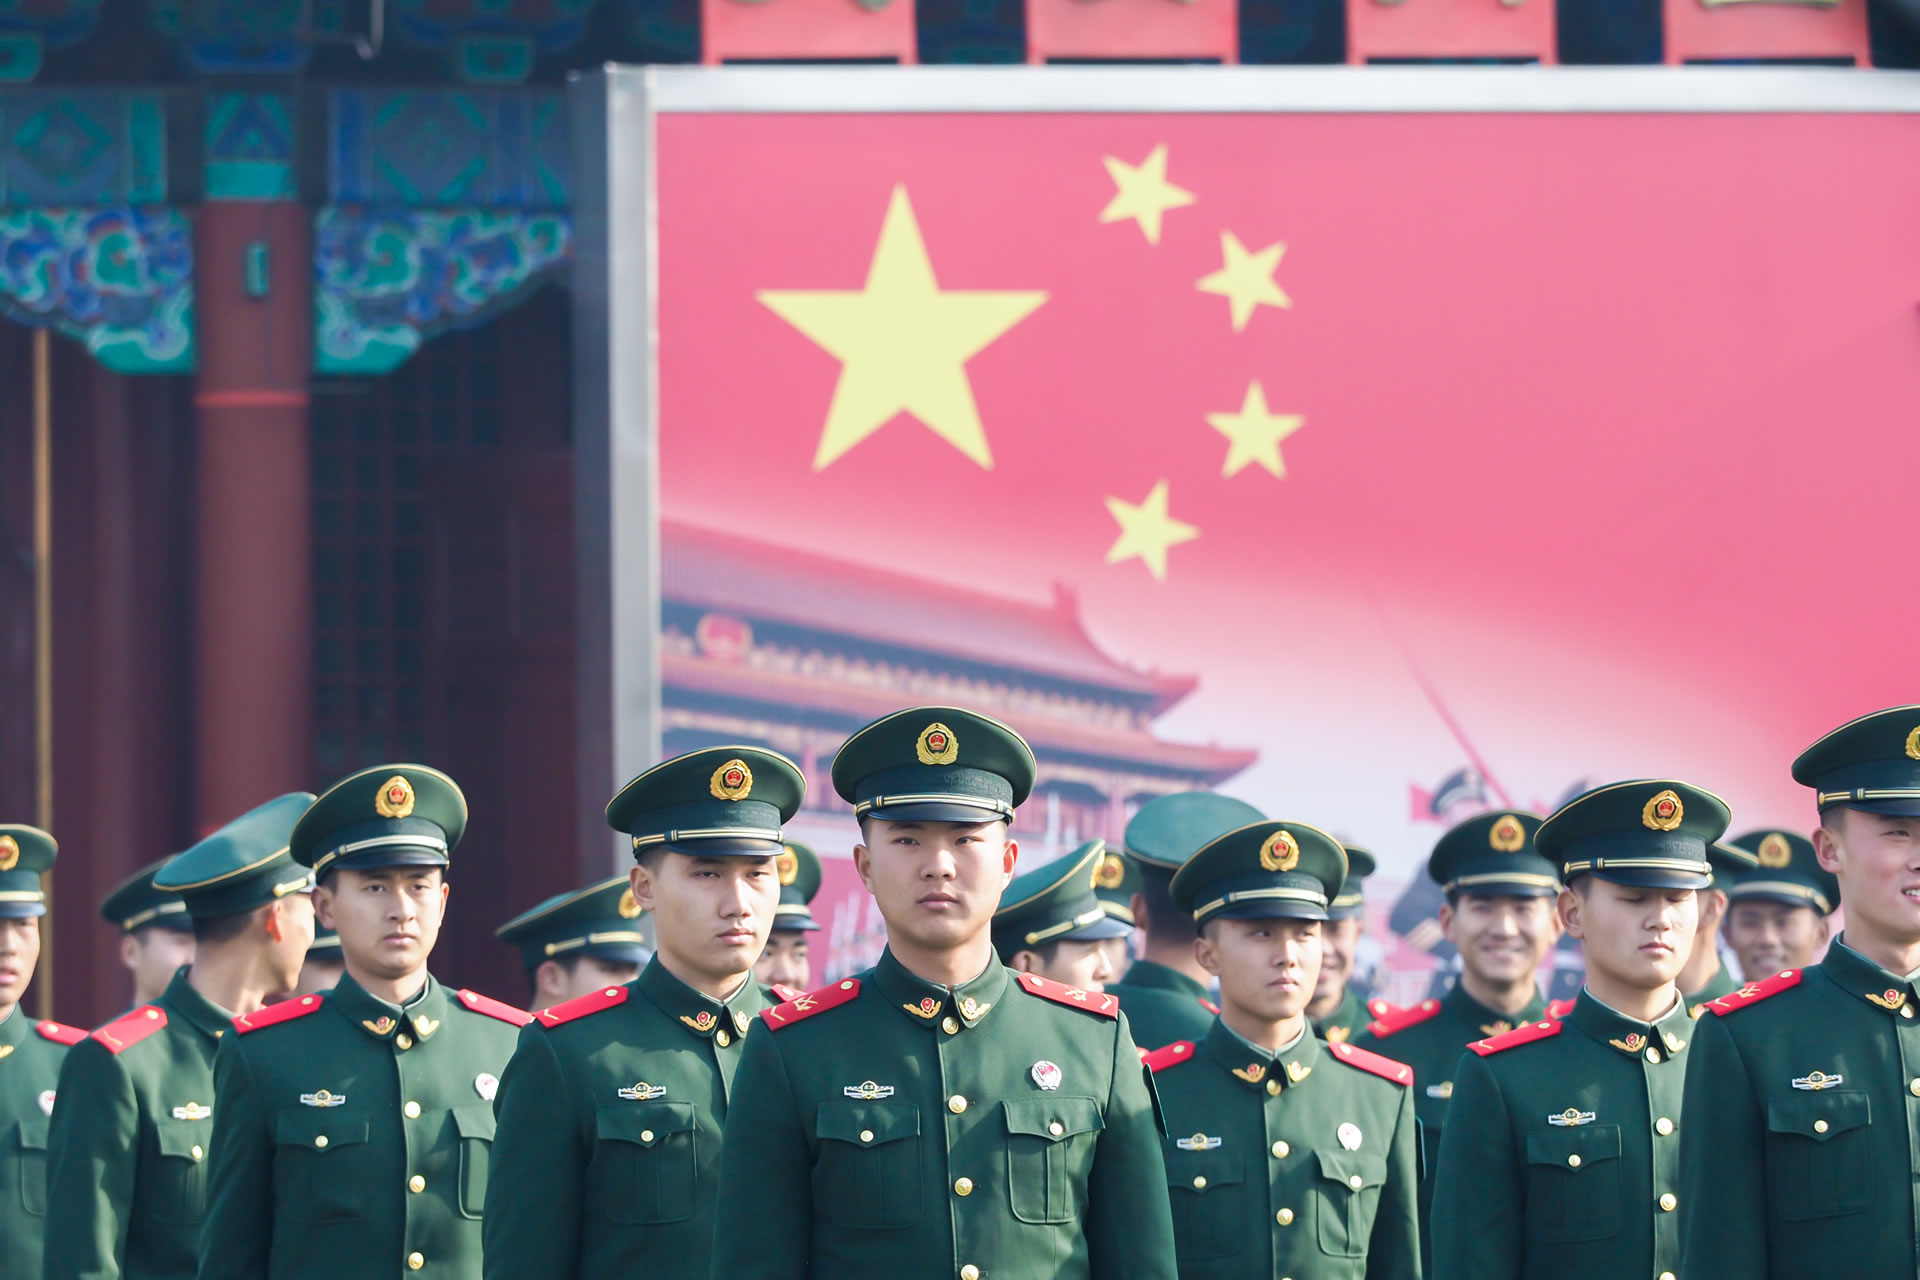 China has become increasing adept at levering economic power to bend democracies to its will